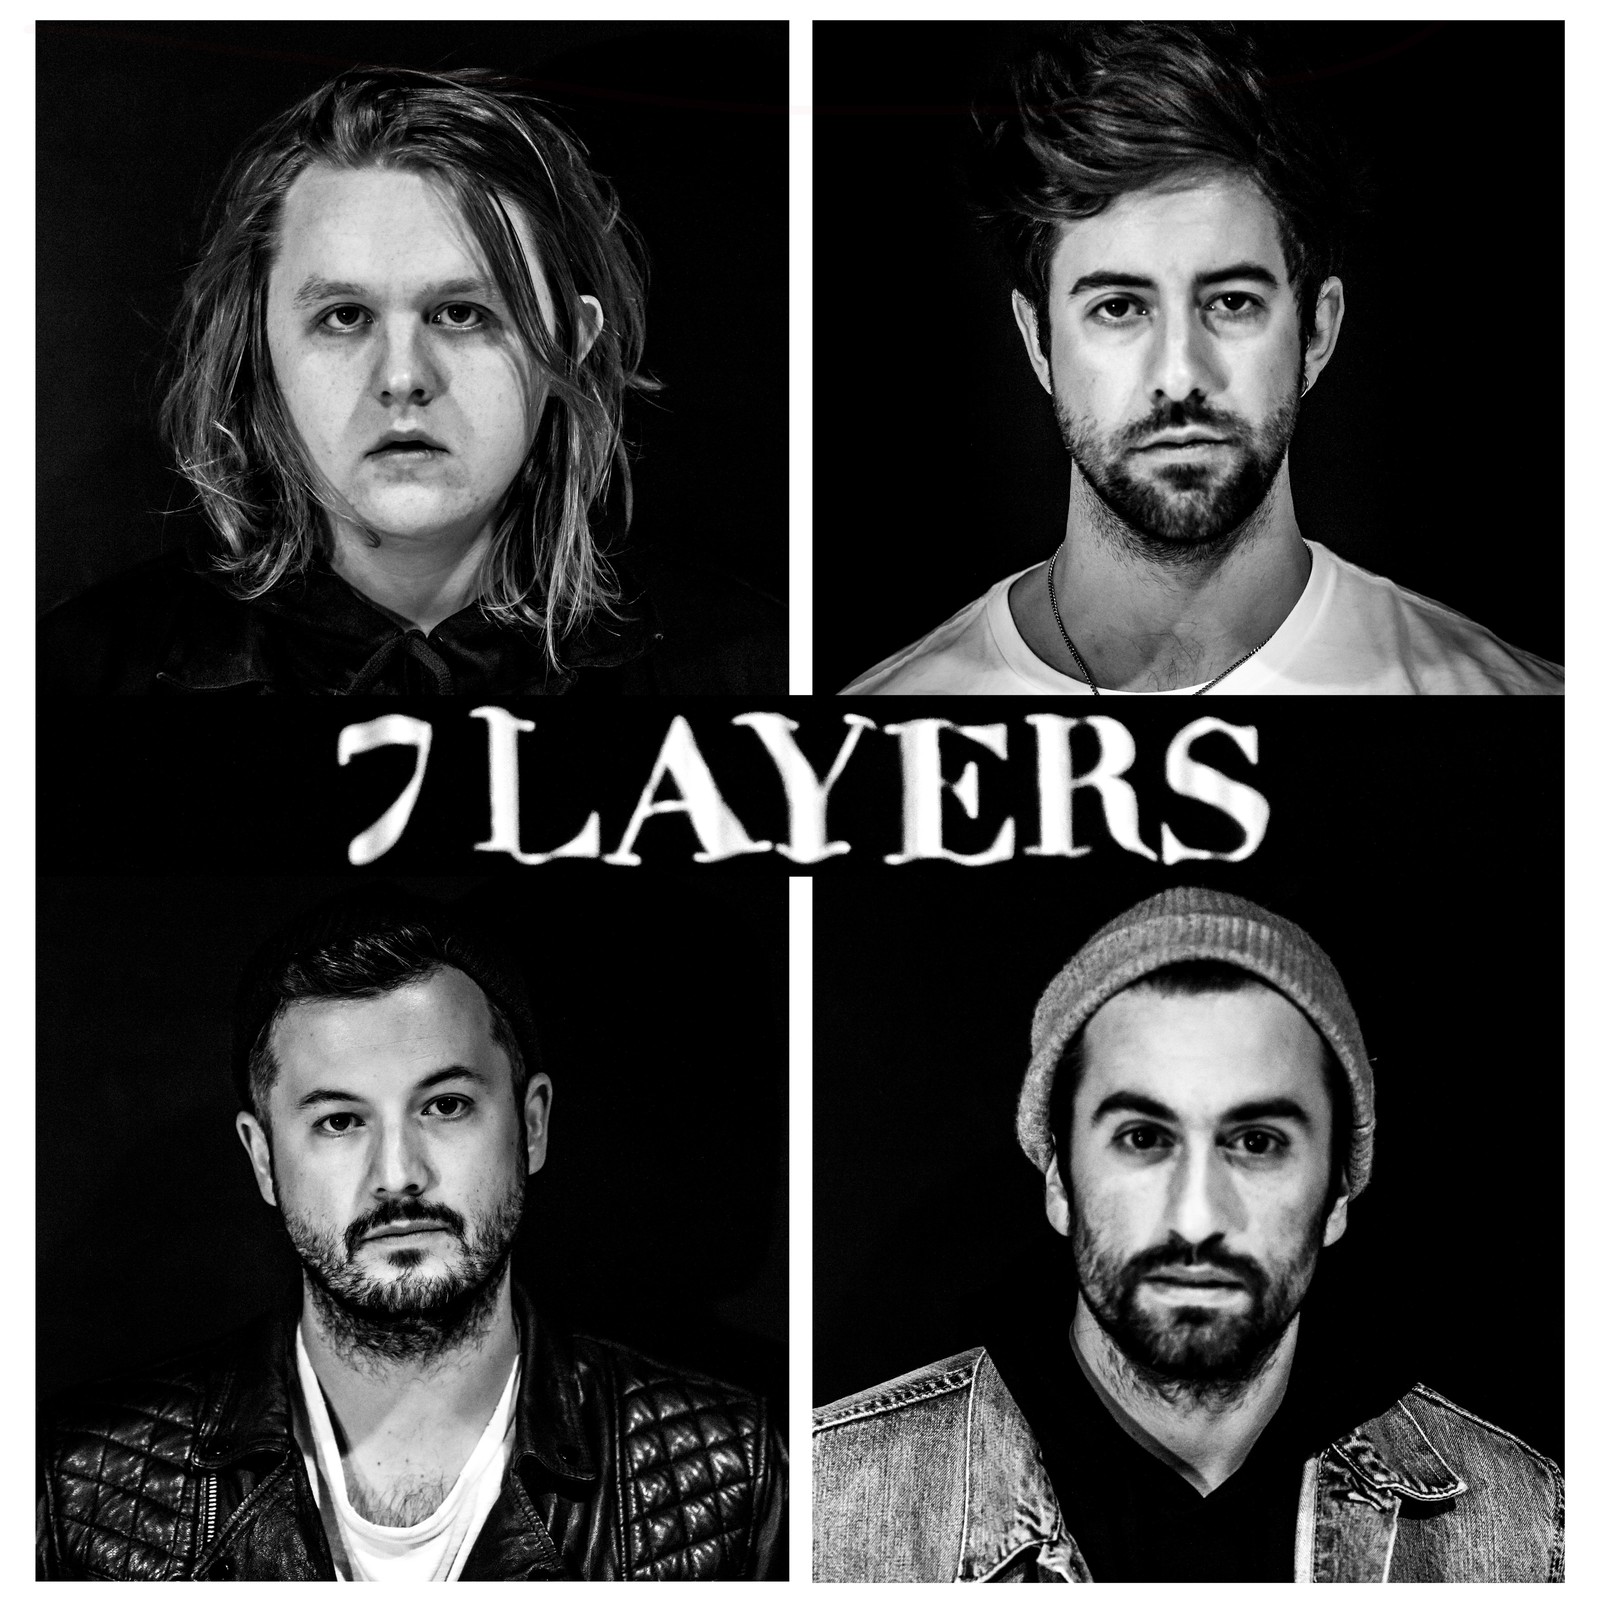 7 Layers Sessions